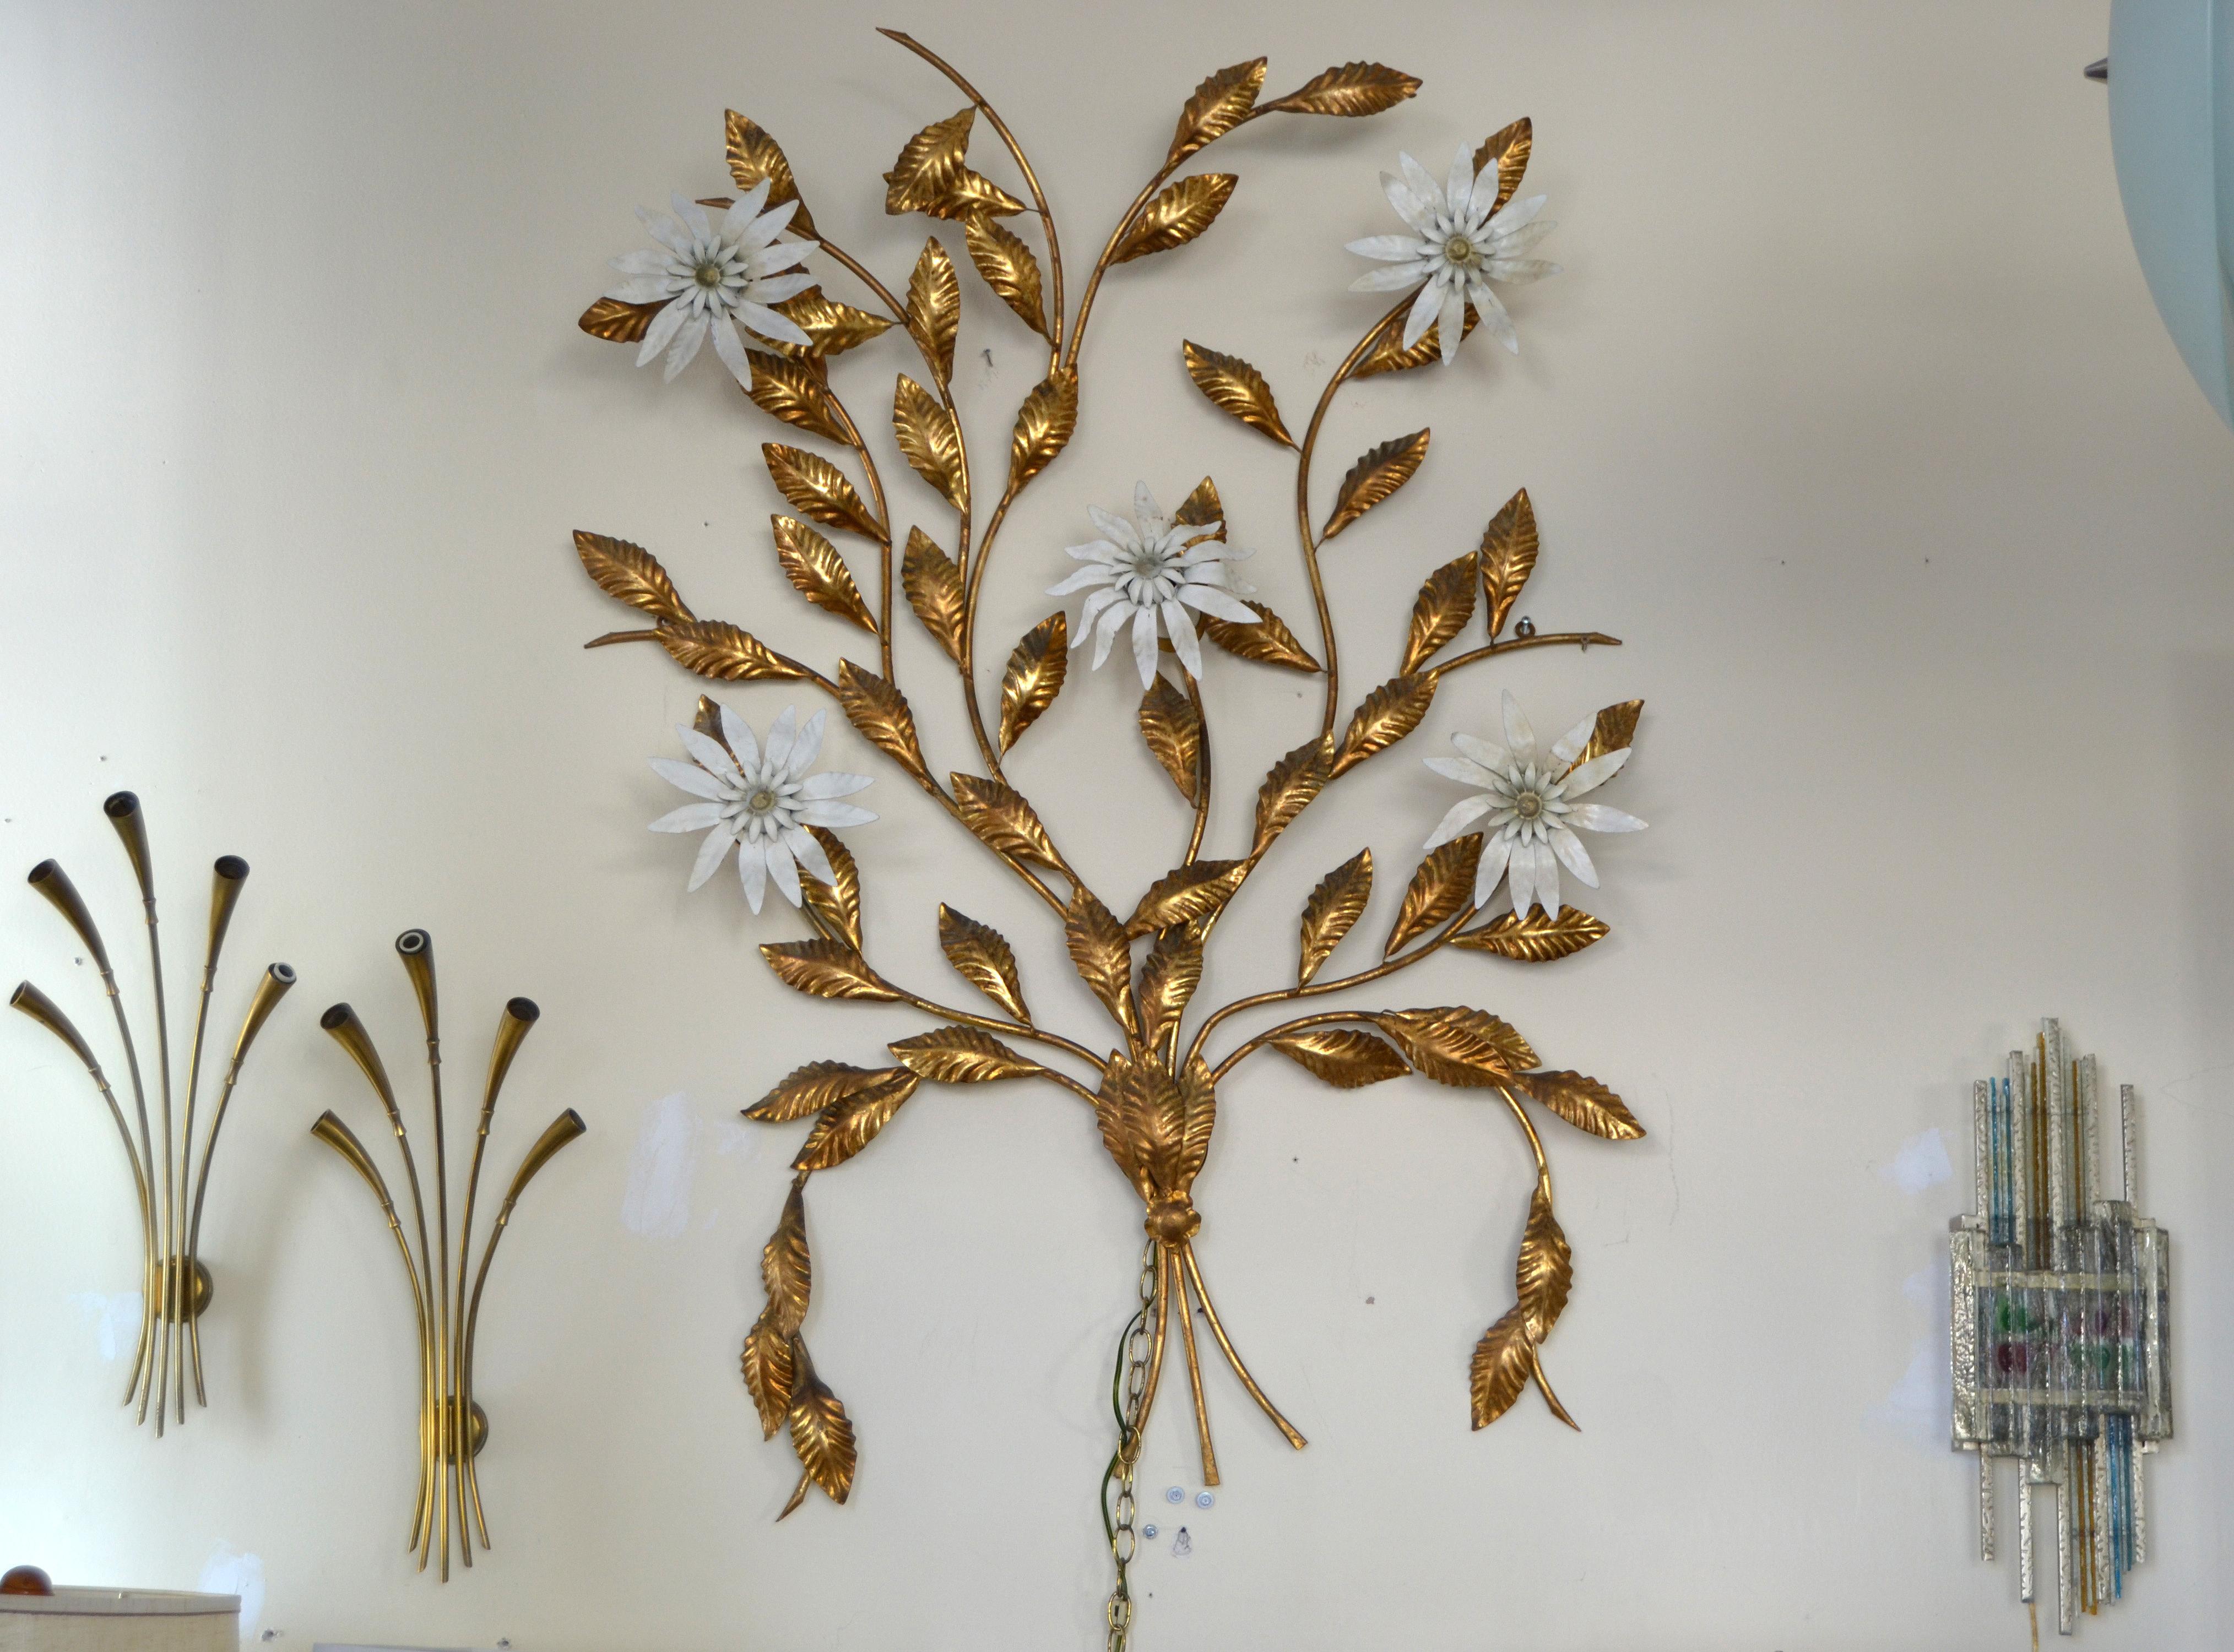 Vintage golden metal tree branch wall sculpture with 5 flower lights.
The flowers are made out of enamel and each uses a max. 40 watts light bulb.
The sculpture has a plug in connection and works perfectly.